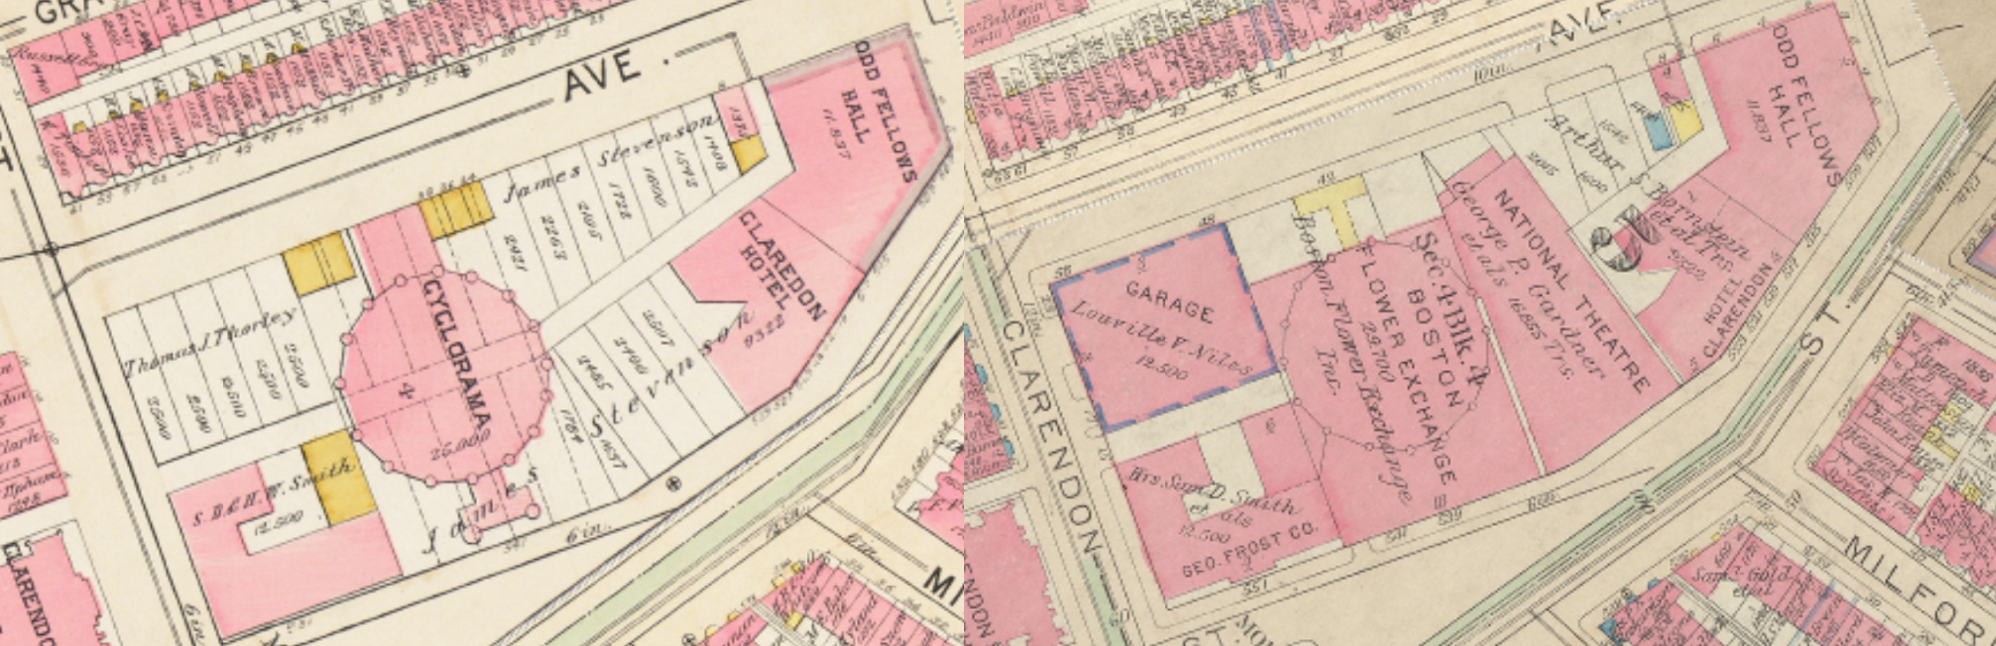 Here one can see changes around the Cyclorama. In 1888, there were a variety of small buildings used for apartments and factories. By 1912, the block had filled in with larger buildings like theaters and hotels.